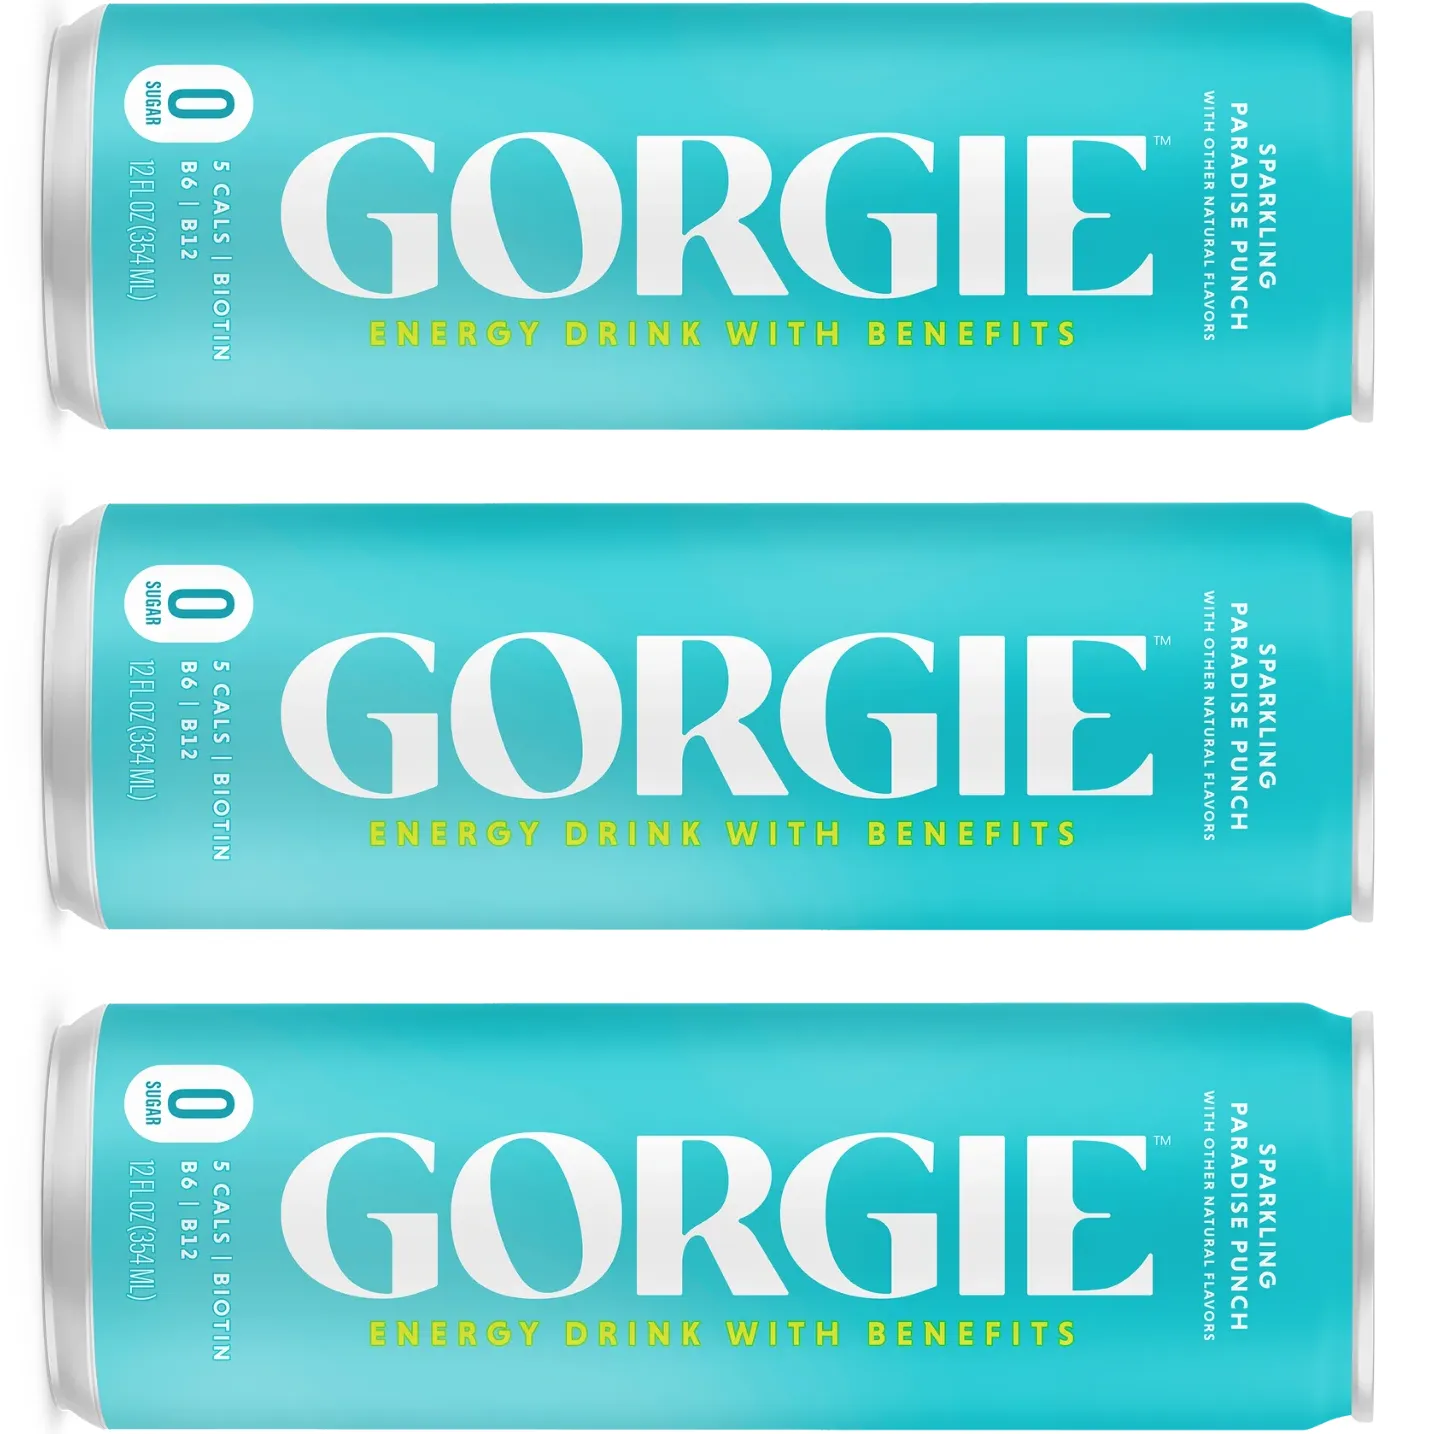 Free Can Of Gorgie Sparkling Drink